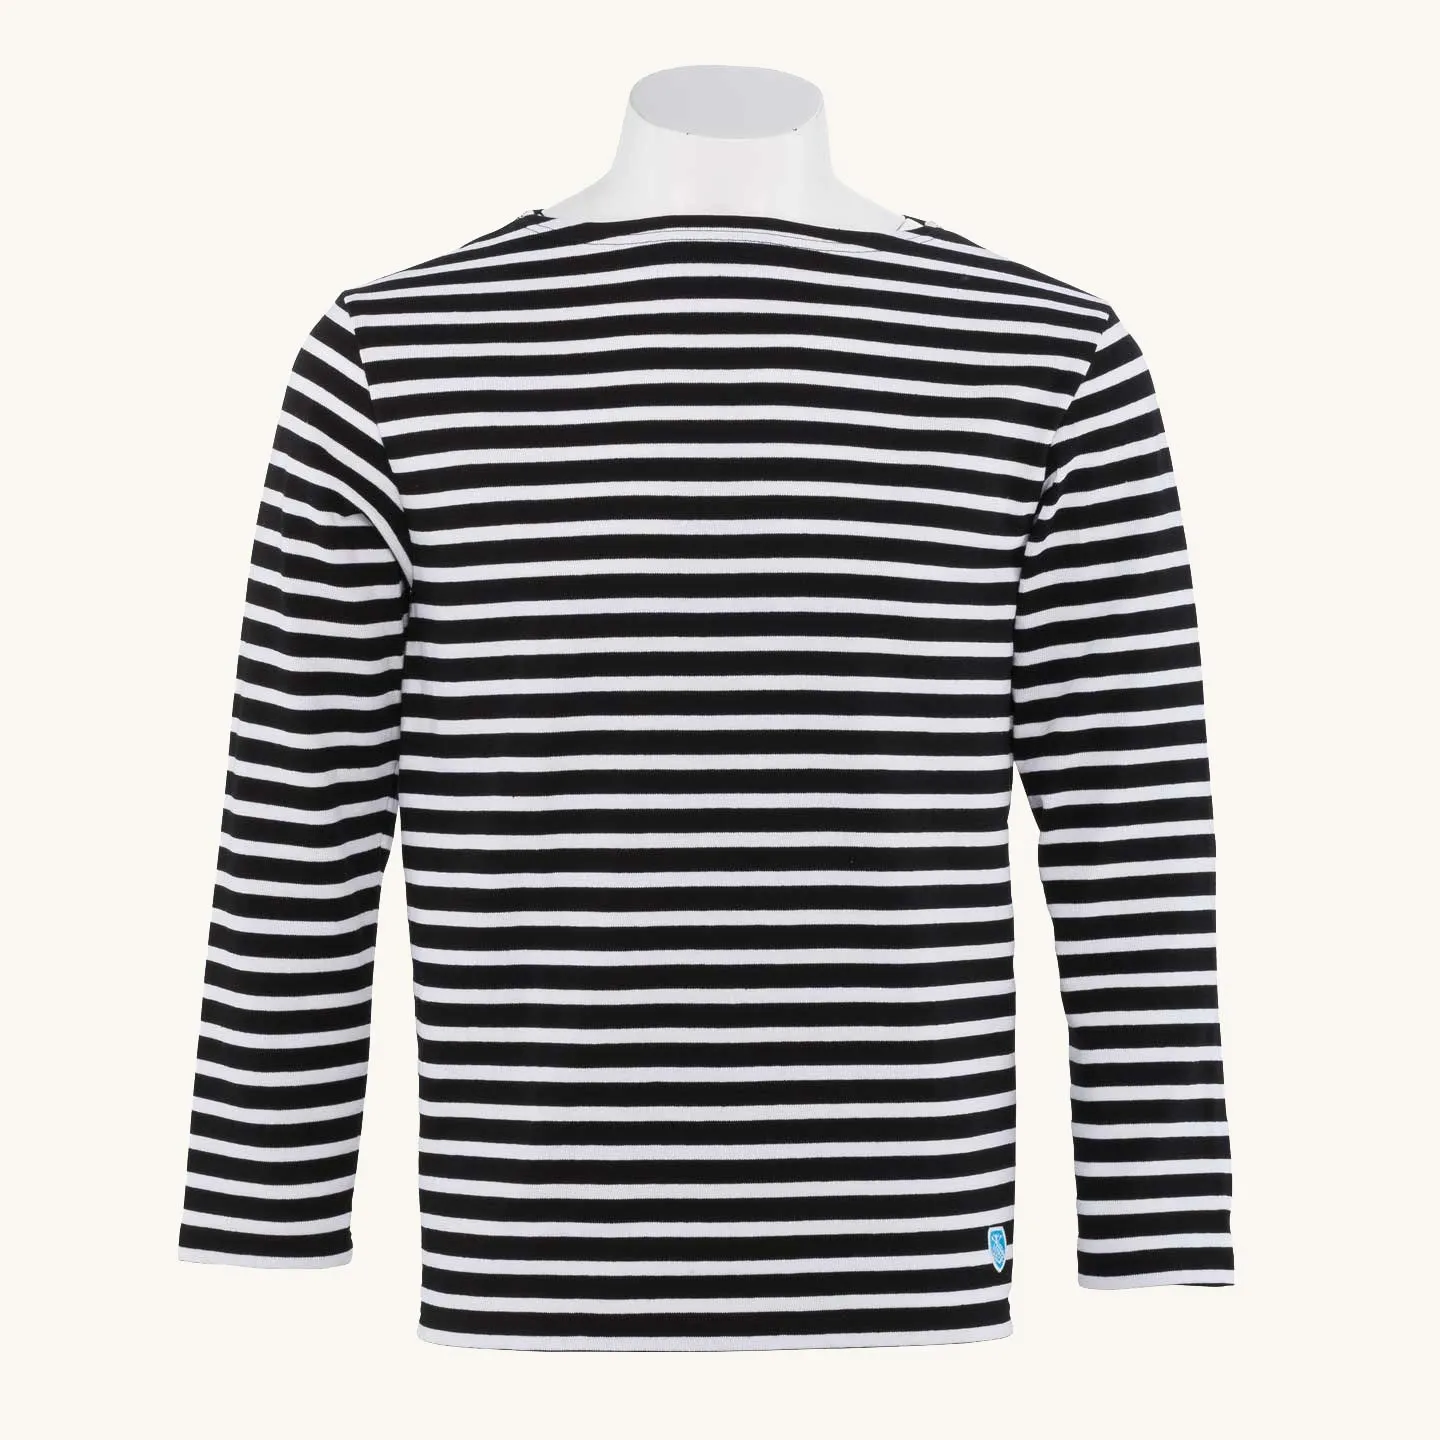 Striped shirt Black / White, unisex made in France Orcival